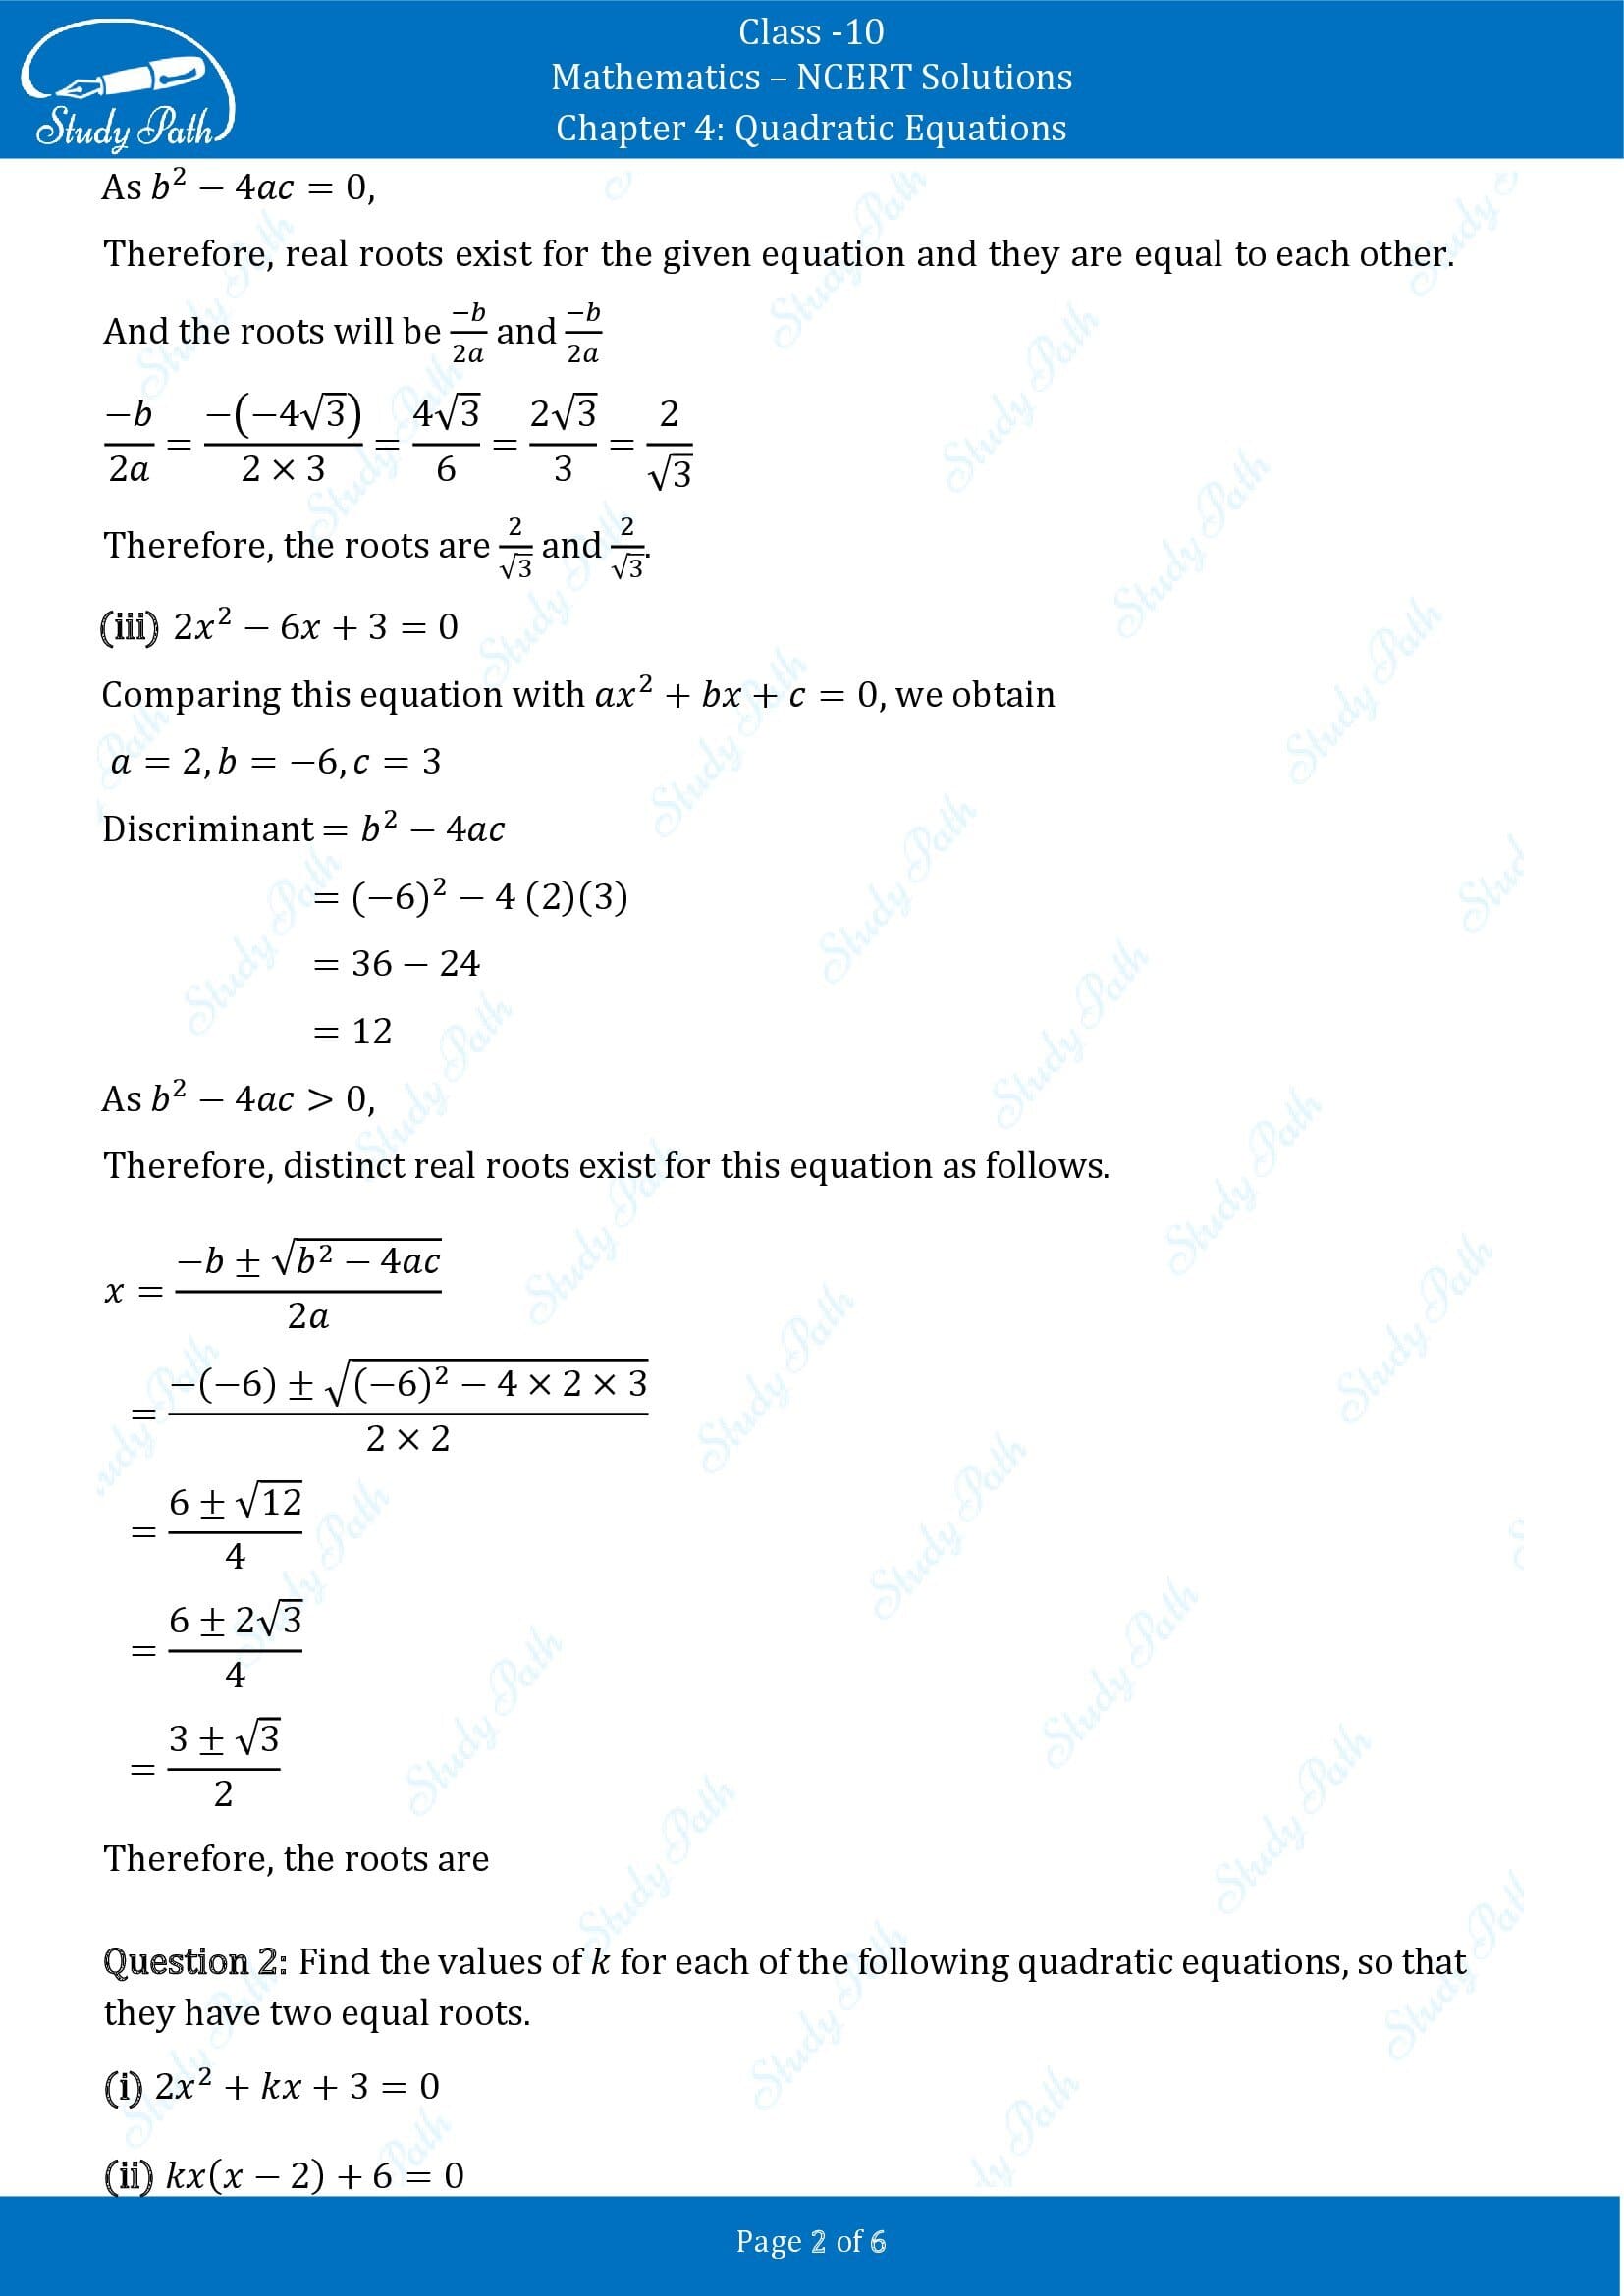 NCERT Solutions for Class 10 Maths Chapter 4 Quadratic Equations Exercise 4.4 00002